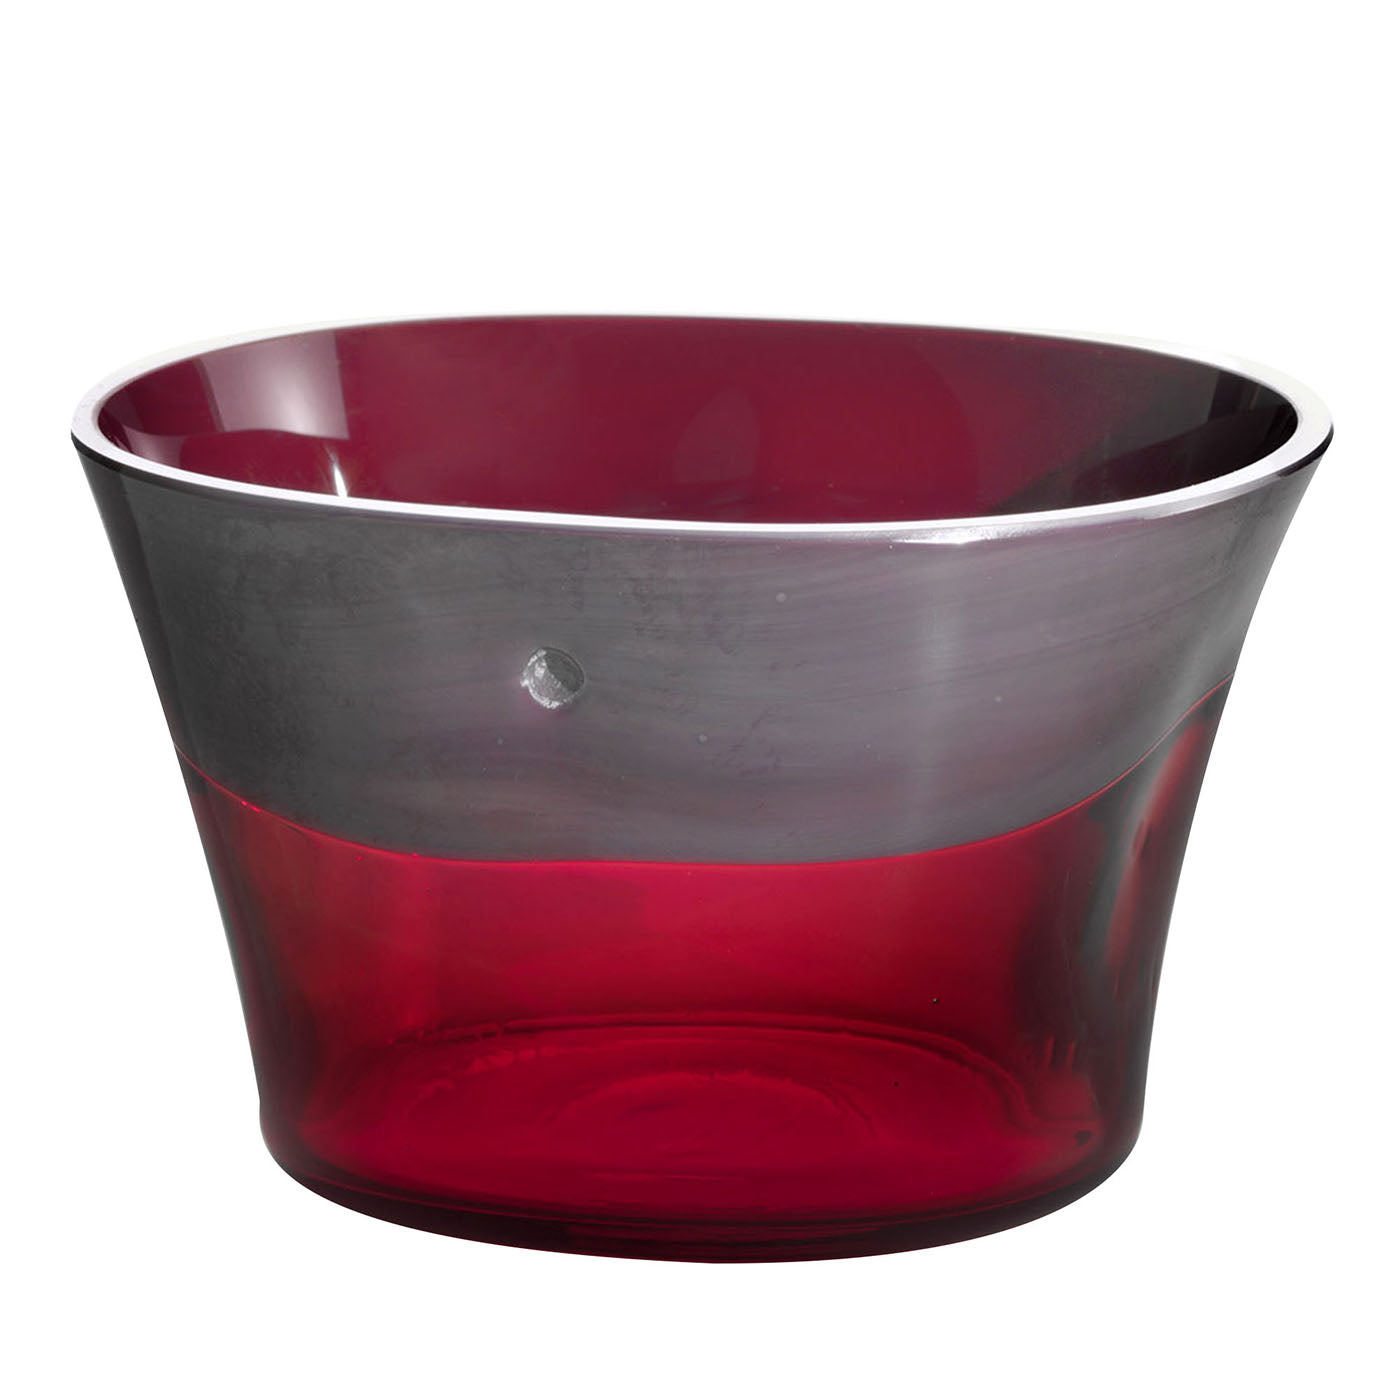 Dandy Small Gray & Cranberry Bowl by Stefano Marcato - Main view